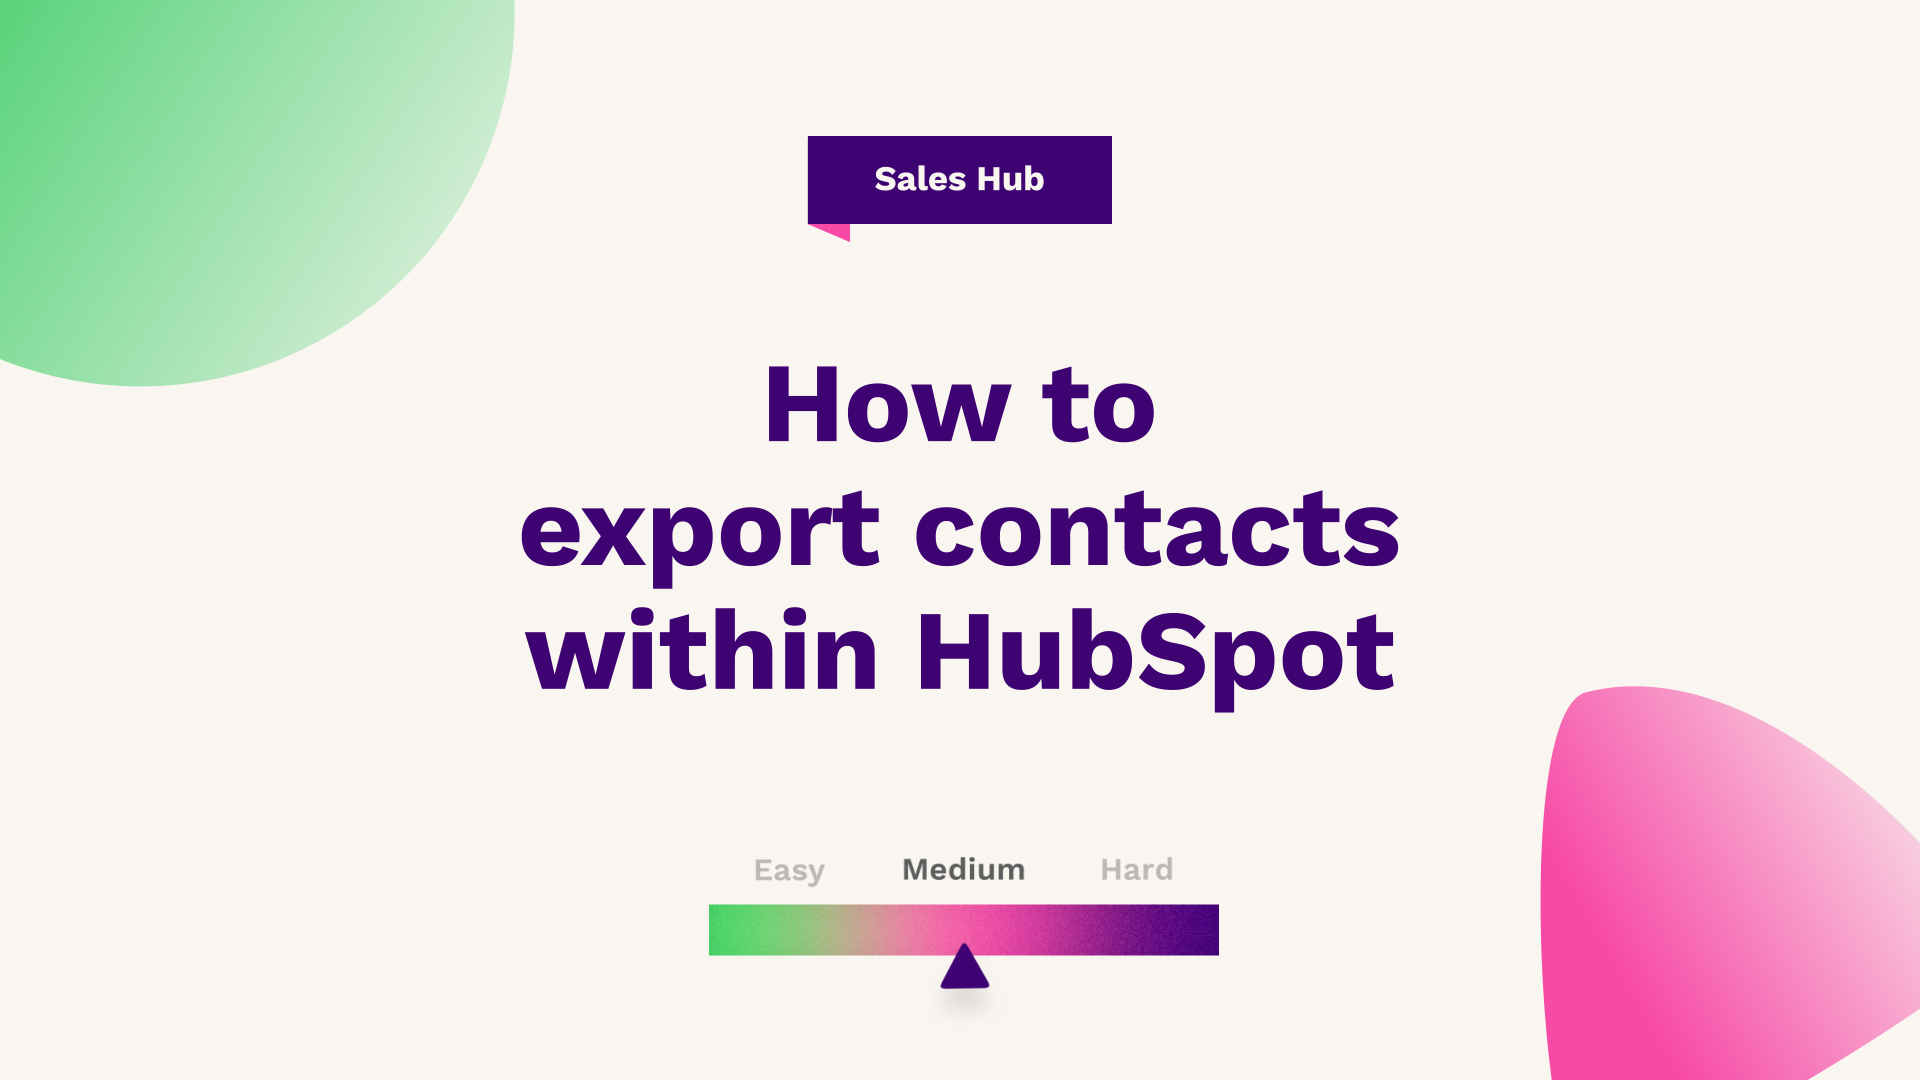 How to export contacts within HubSpot